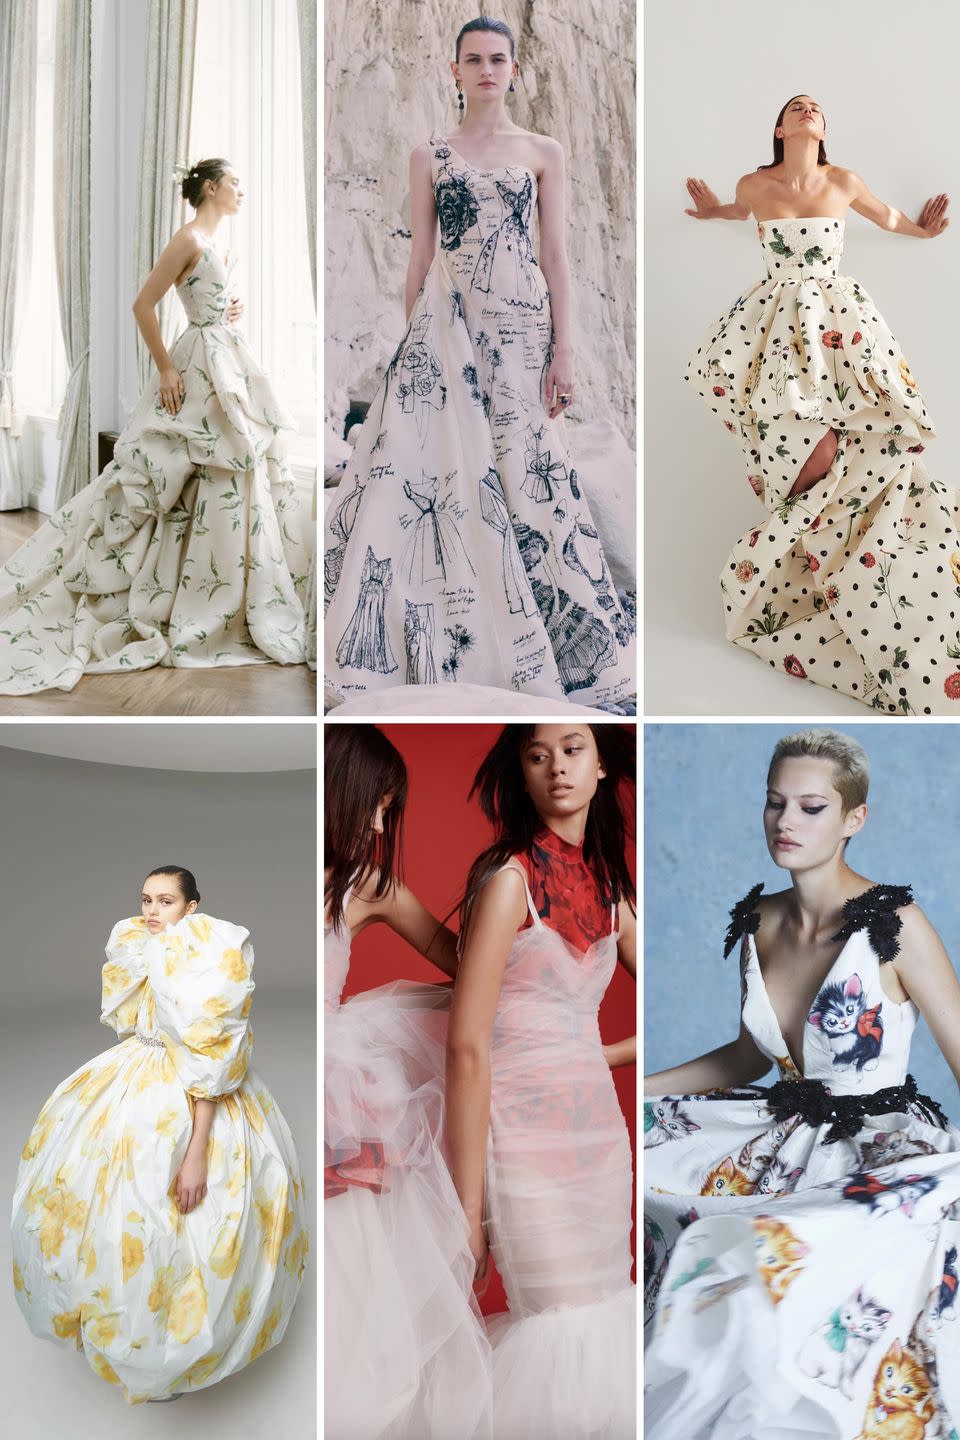 <p>This trend goes beyond florals and pops of color. Emerging from a year like 2020, 2021 is all about bold and playful prints that make us smile, done in chic new ways. Whether it be all-over graphic blooms or characterizing designs a la Monique Lhuillier's Lily of the Valley, Miu Miu's cat-c0vered gown, or Alexander McQueen's vintage fashion sketched frock, this is for the bride who plans to throw caution to the wind once stay at home orders are lifted and gatherings commence once more. </p><p>In short: you can have fun with fashion and play dress up, even for moments as epic as your ceremony. </p><p><em>Clockwise from left: Monique Lhuillier Bridal Fall 2021; Alexander McQueen Resort 2021; Oscar de la Renta Pre-Fall 2021; Giambattista Valli Spring 2020 Haute Couture; Vera Wang Fall 2021; Miu Miu Resort 2021.</em></p>